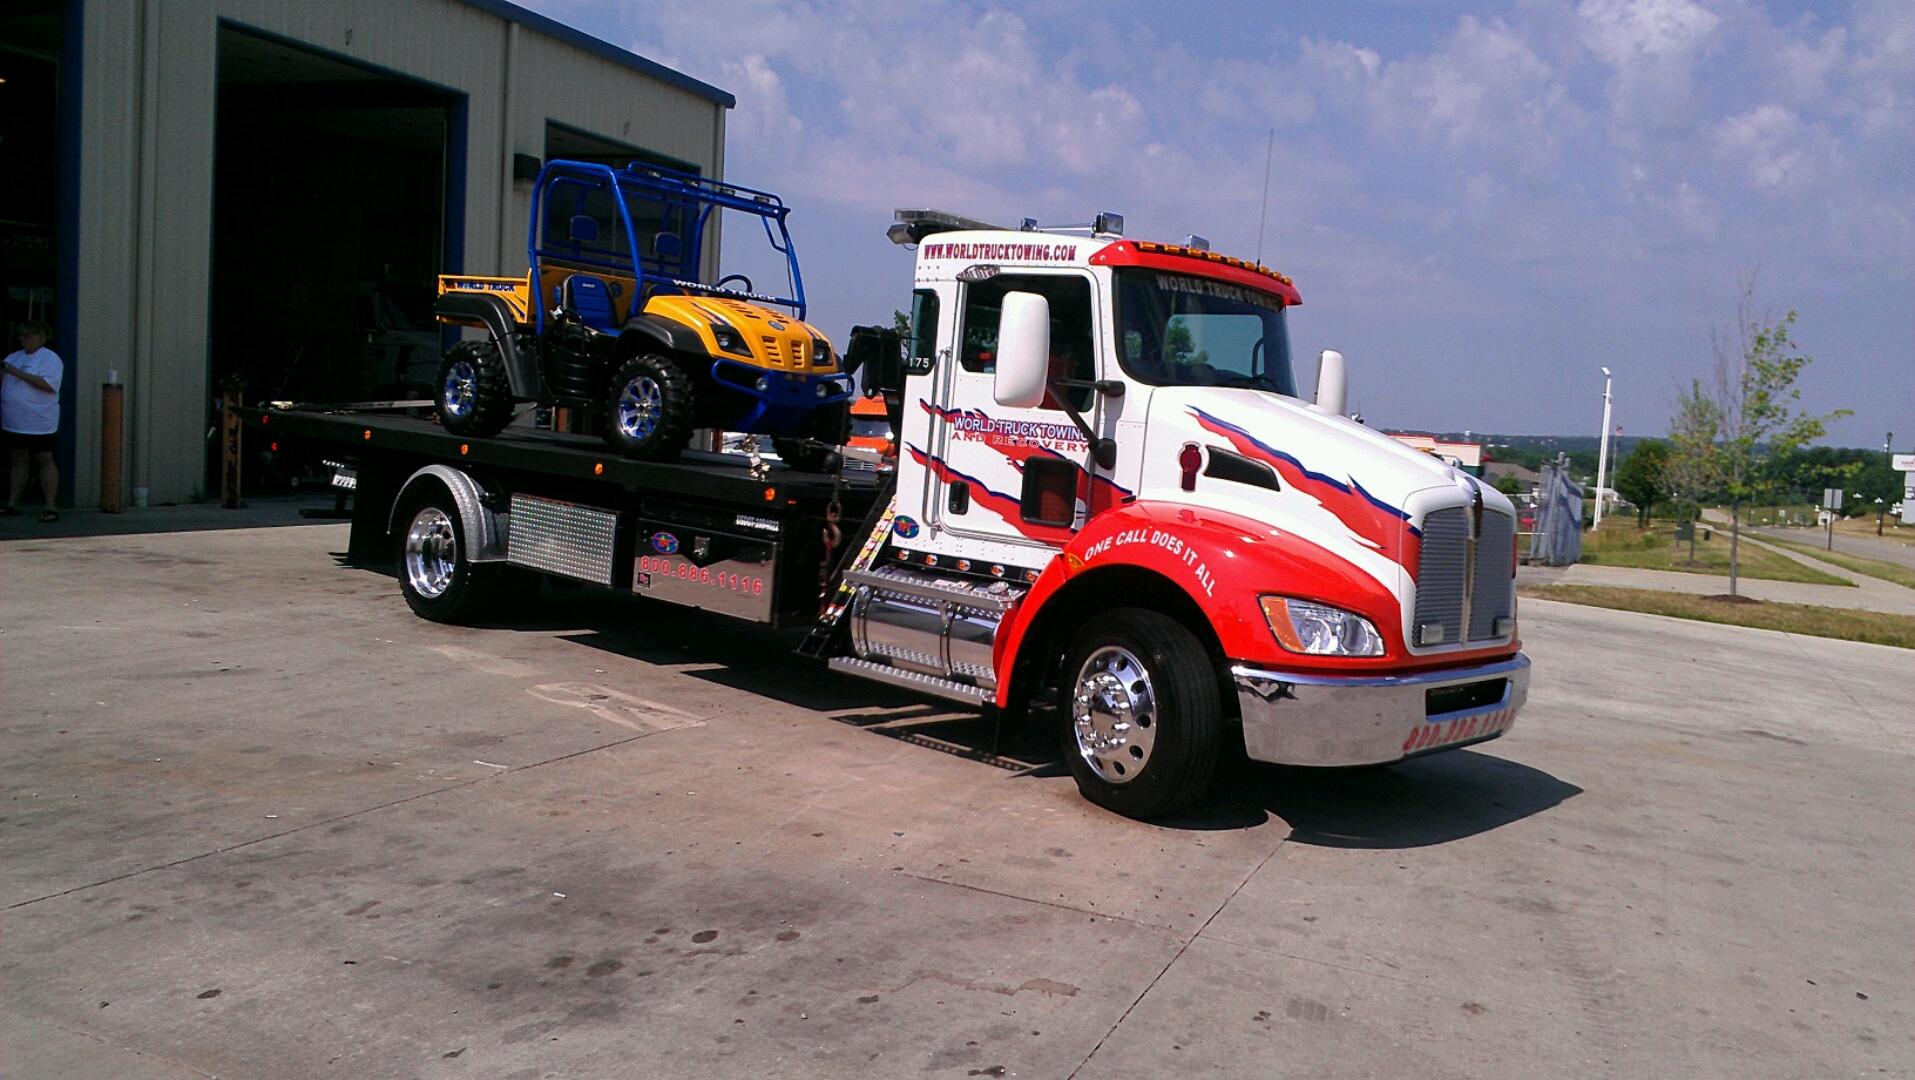 World Truck Towing & Recovery, Inc. Photo